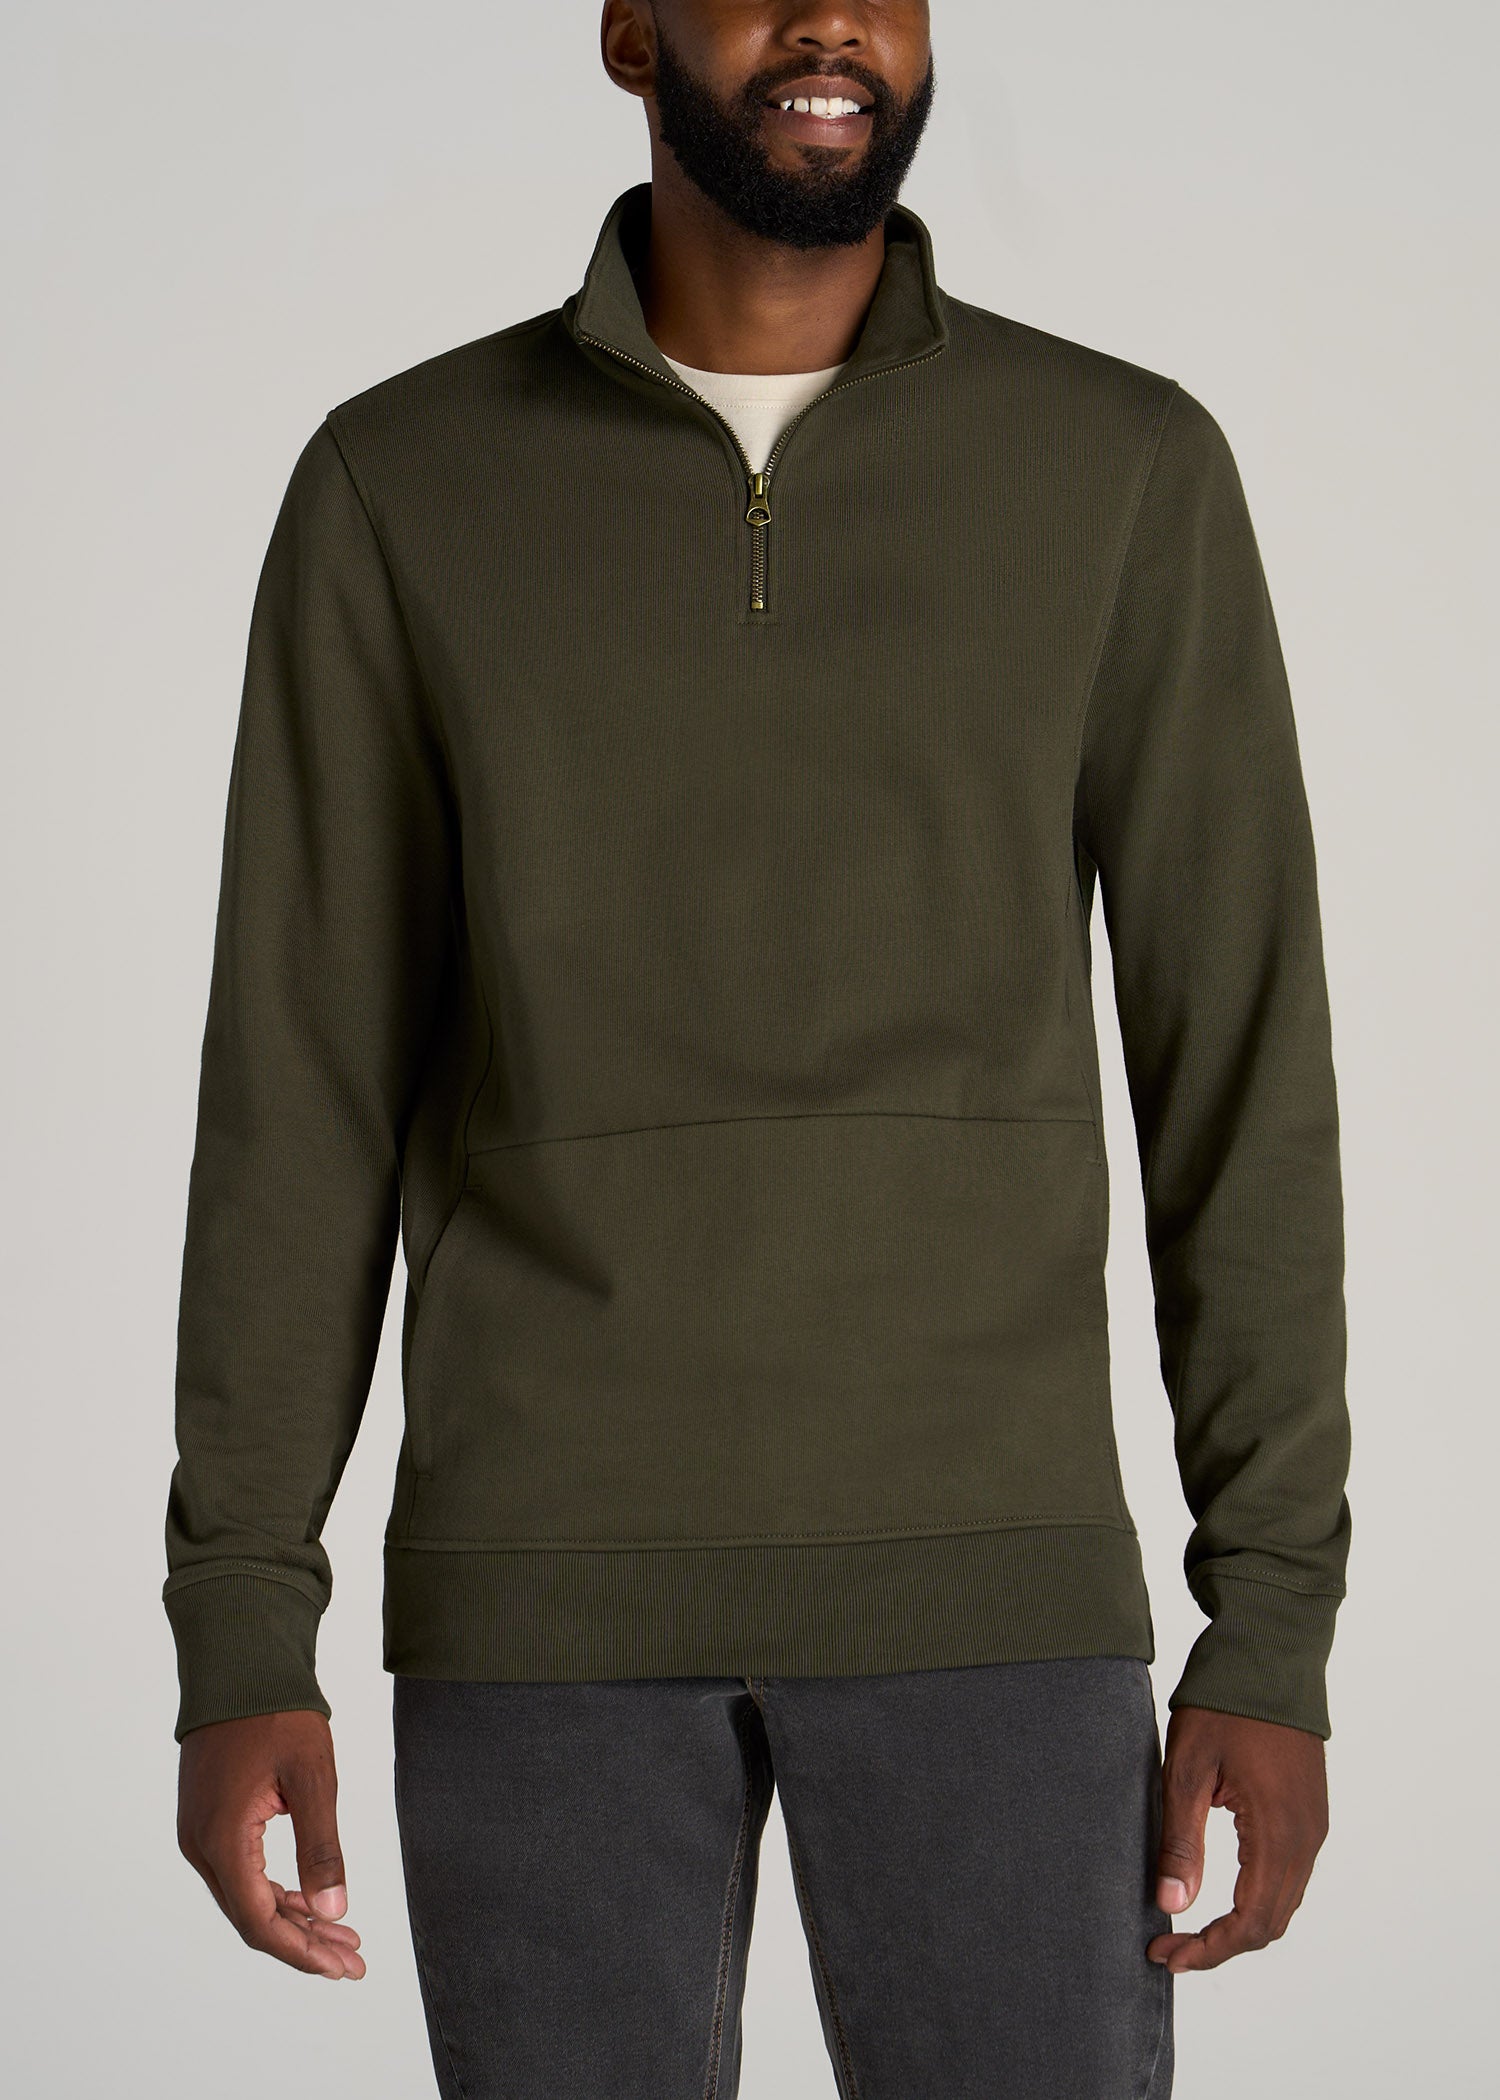 Semi-tall man wearing American Tall's LJ&S Heavyweight Quarter-Zip Pullover in the color Vintage Thyme Green.